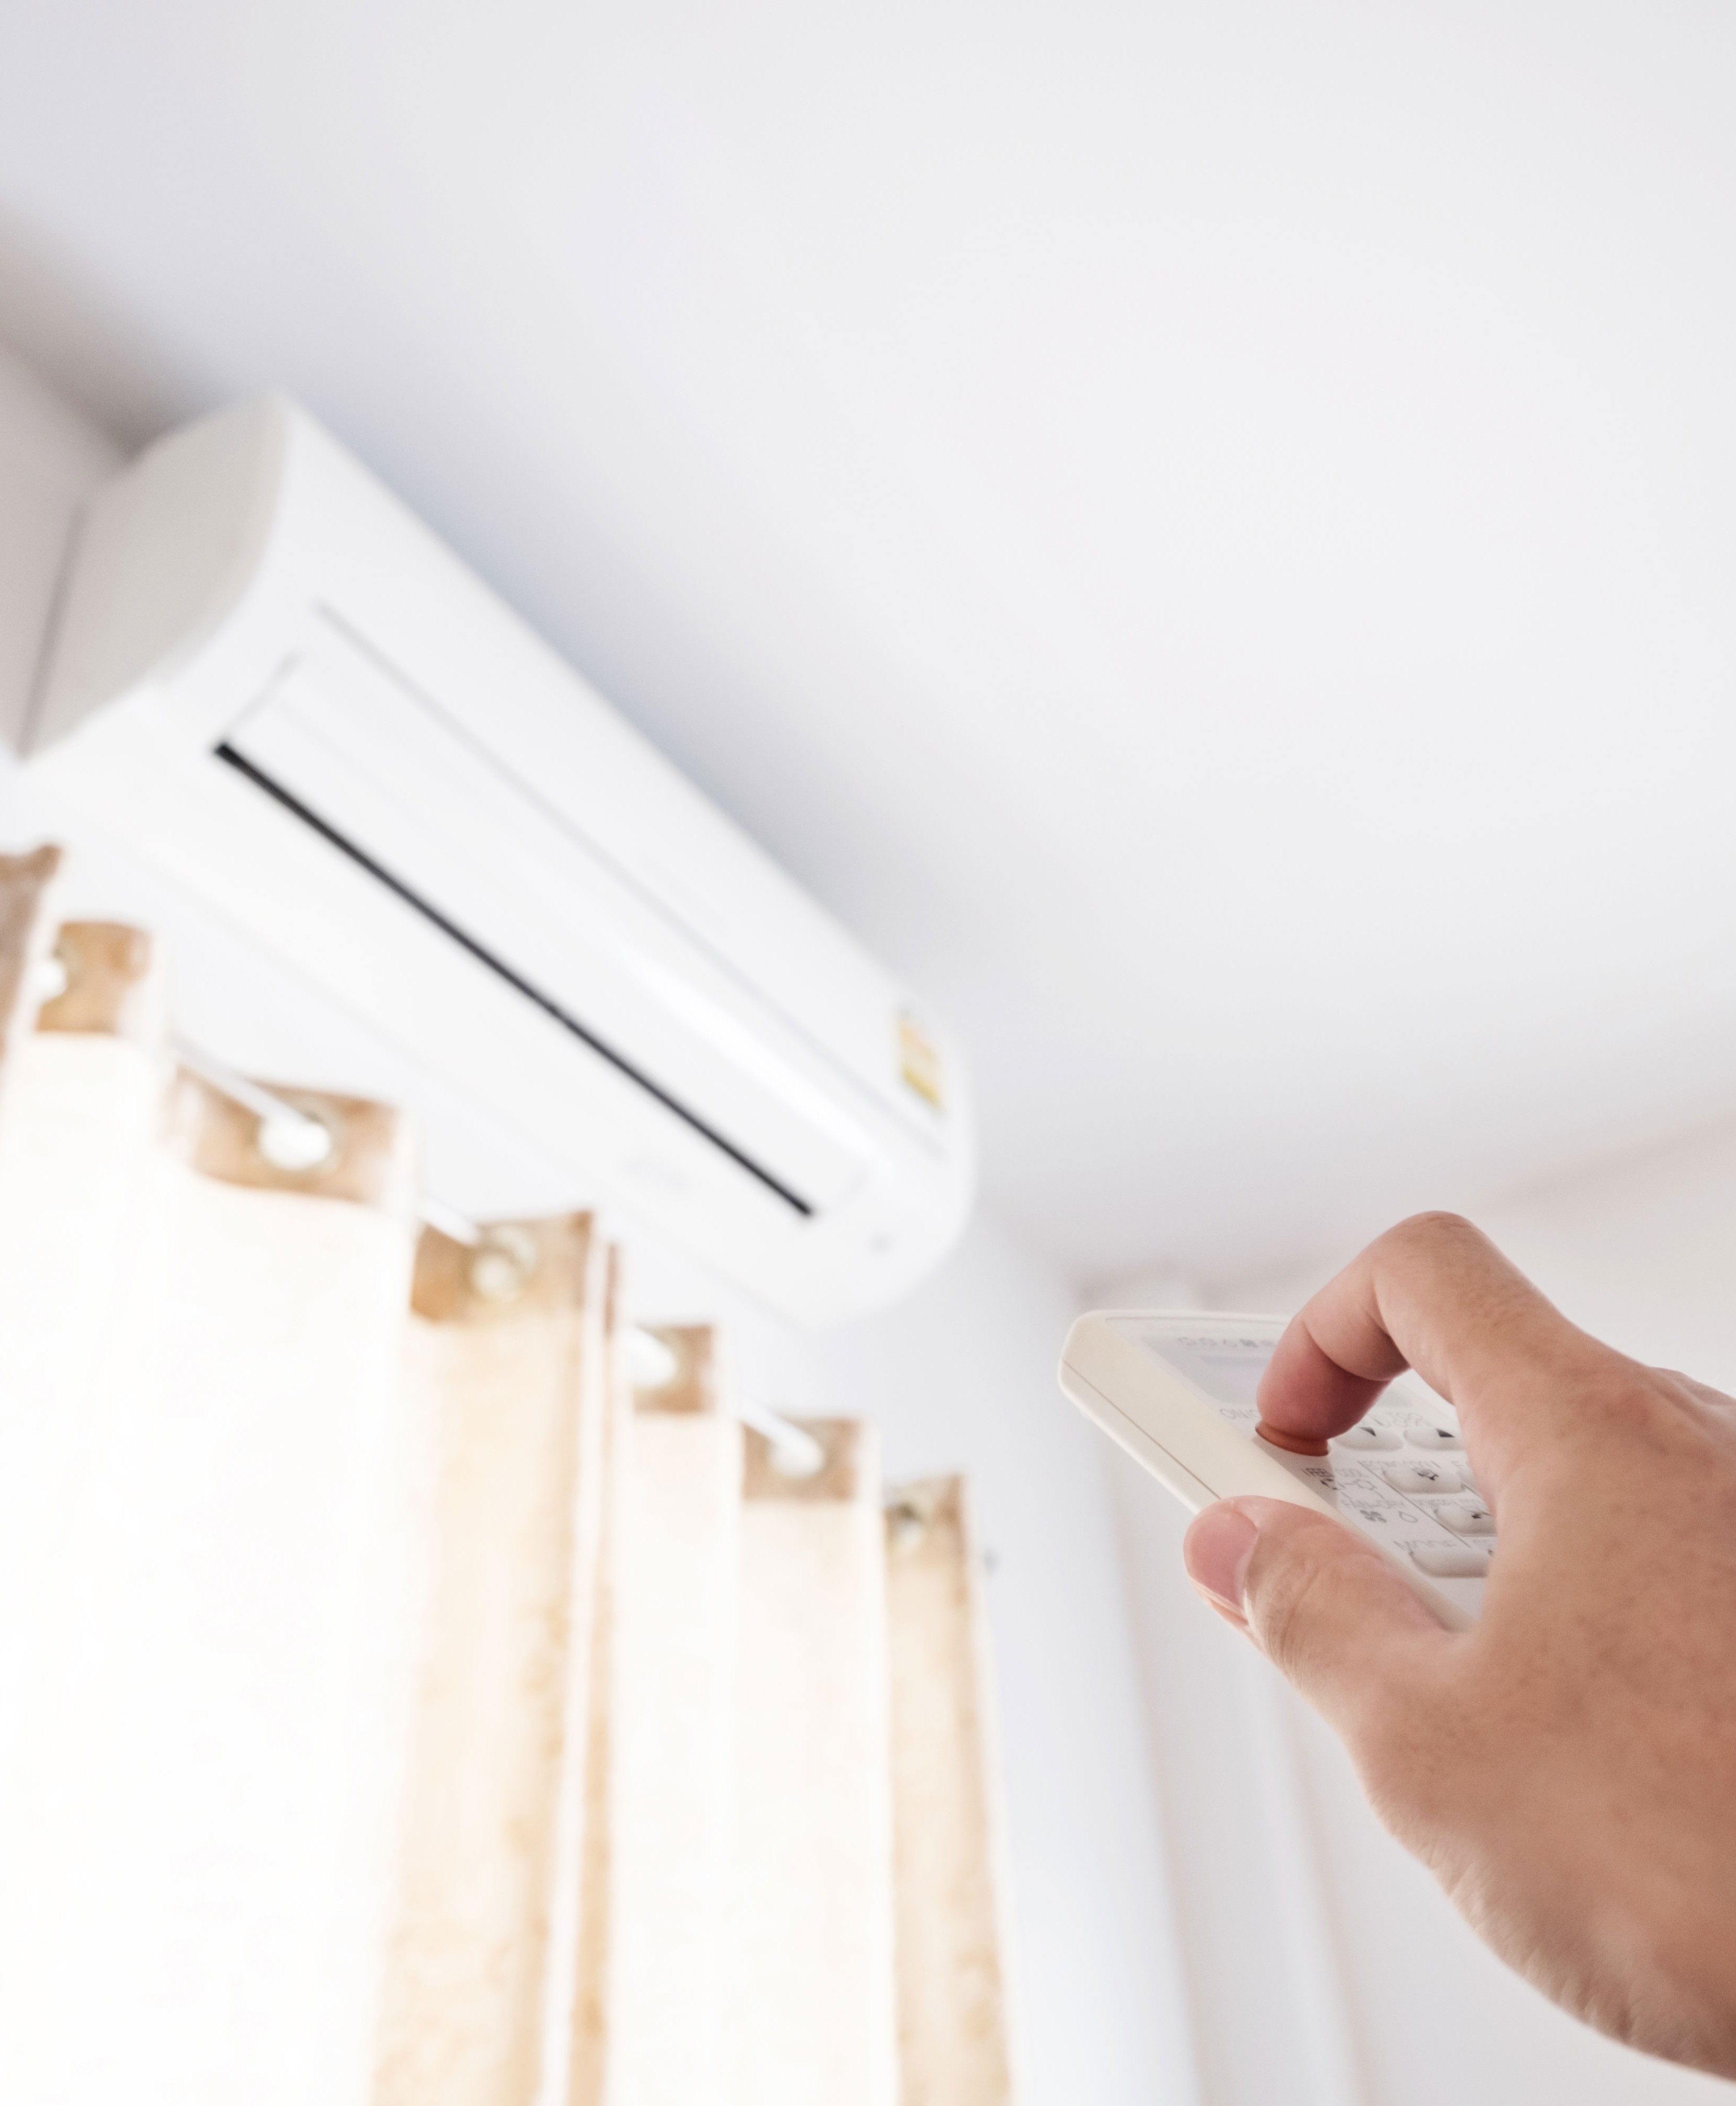 15300329840002211-ductless-gettyimages-625969968.jpg